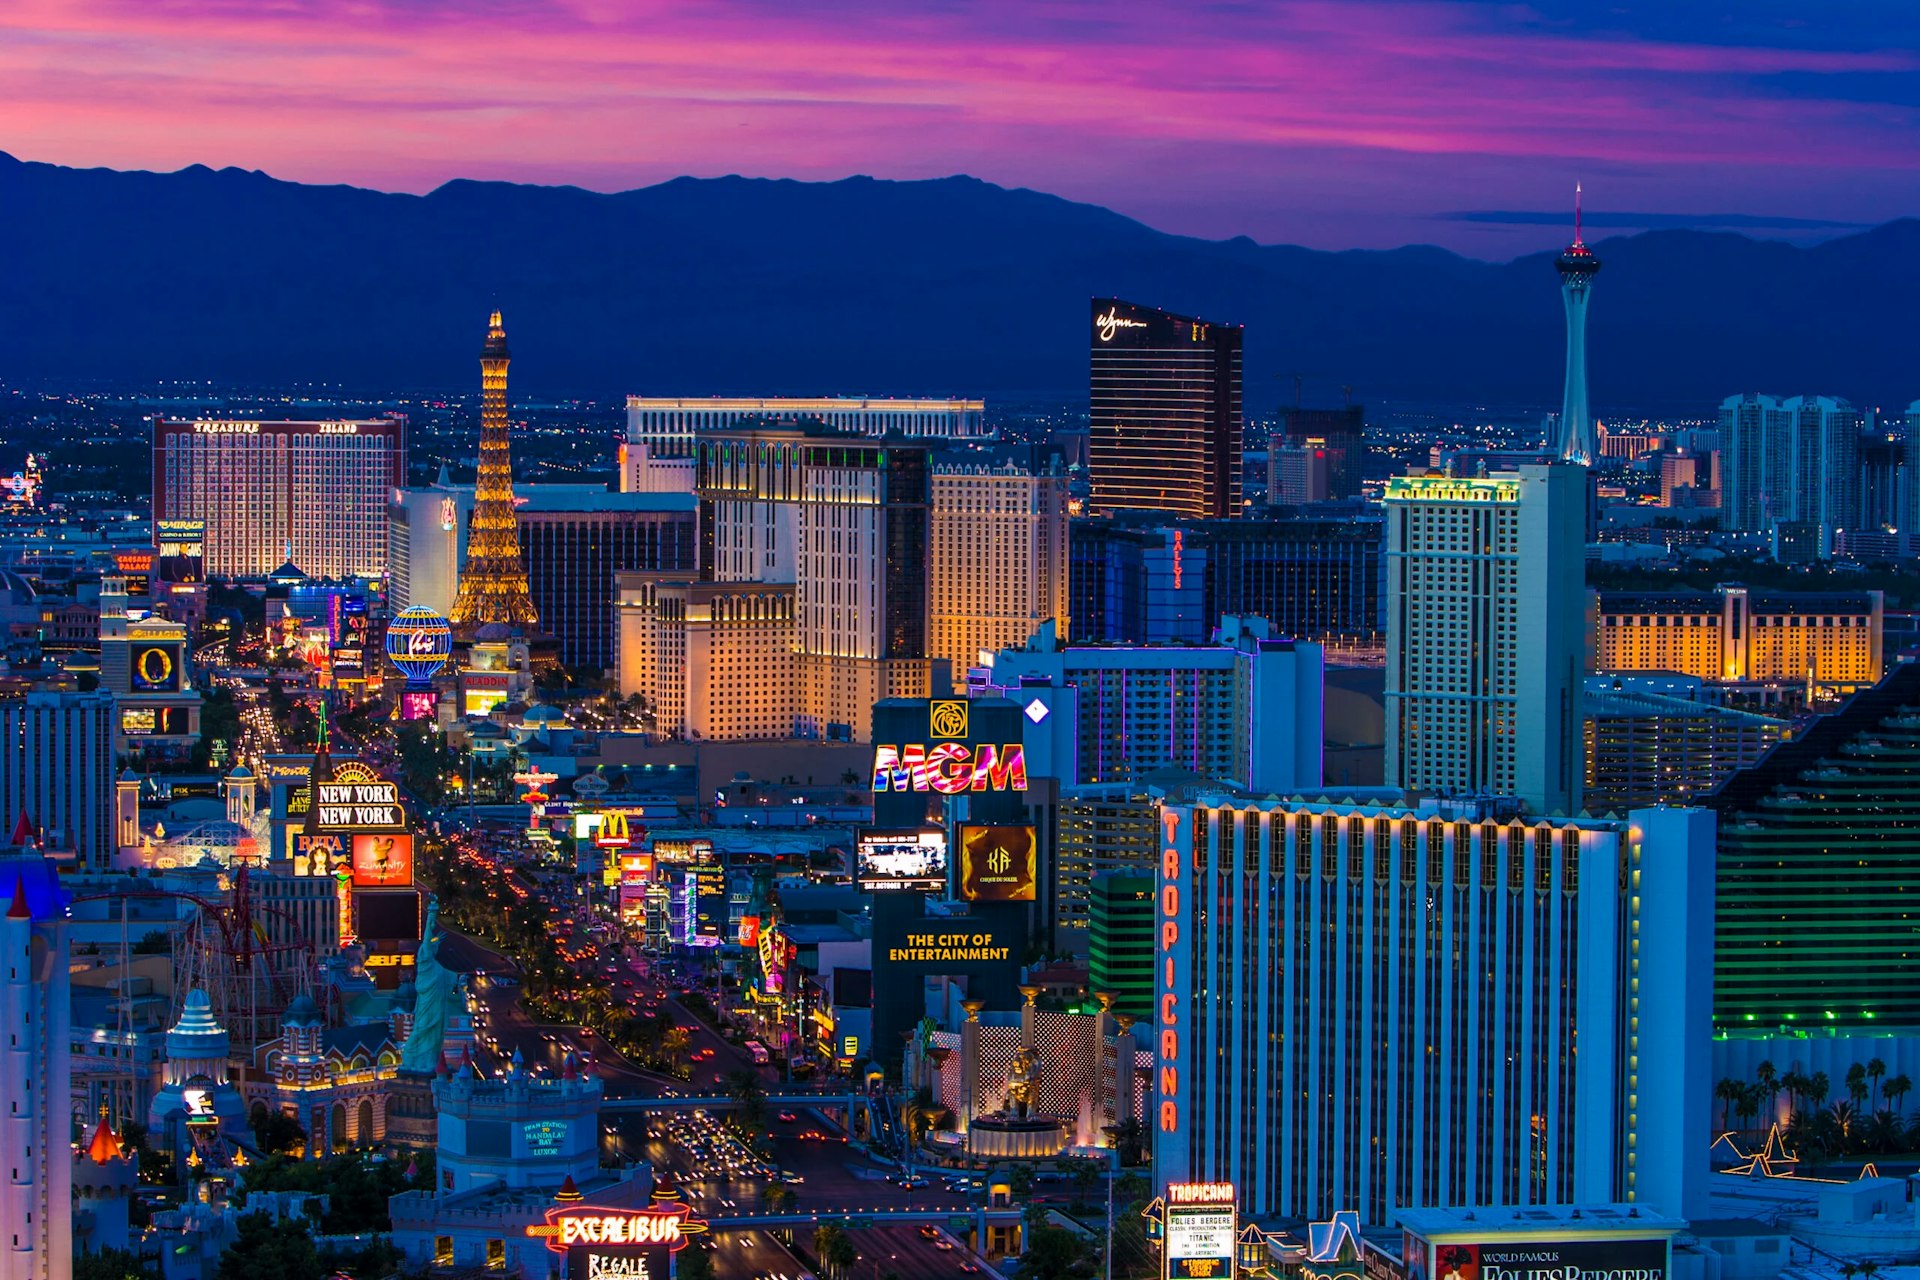 The Vegas strip, one of the best places to redeem points and miles for top-tier rewards